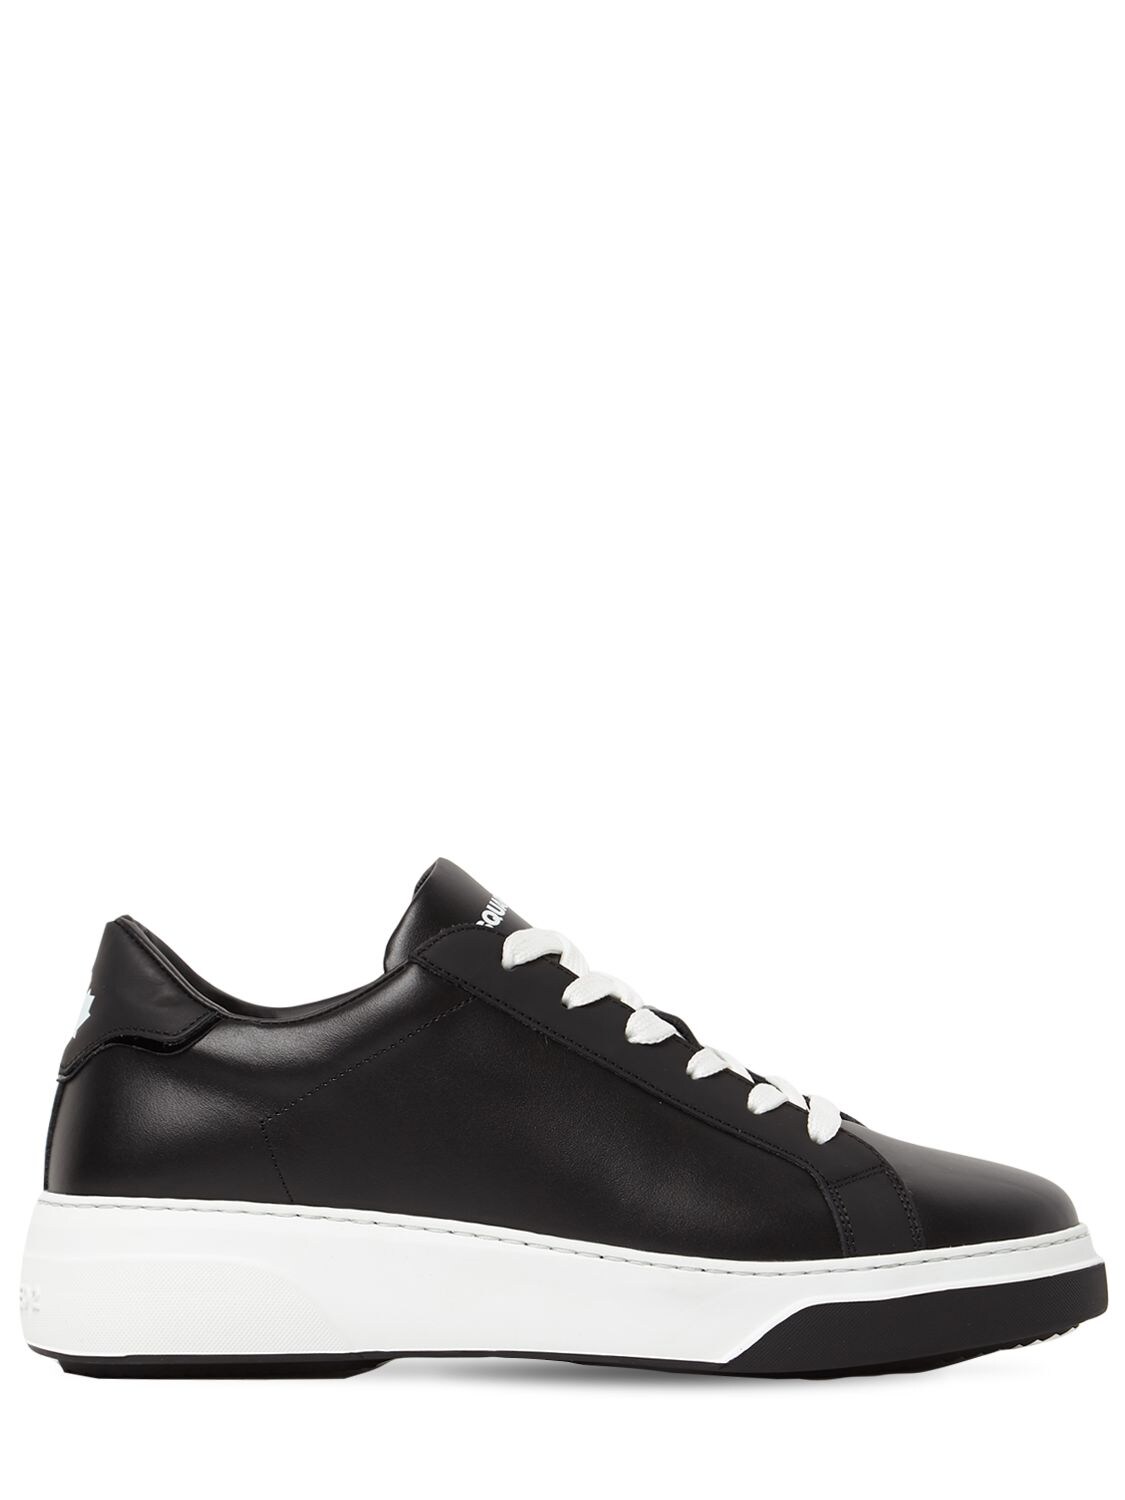 DSQUARED2 BUMPER LEATHER SNEAKERS,74I075009-MJEYNA2